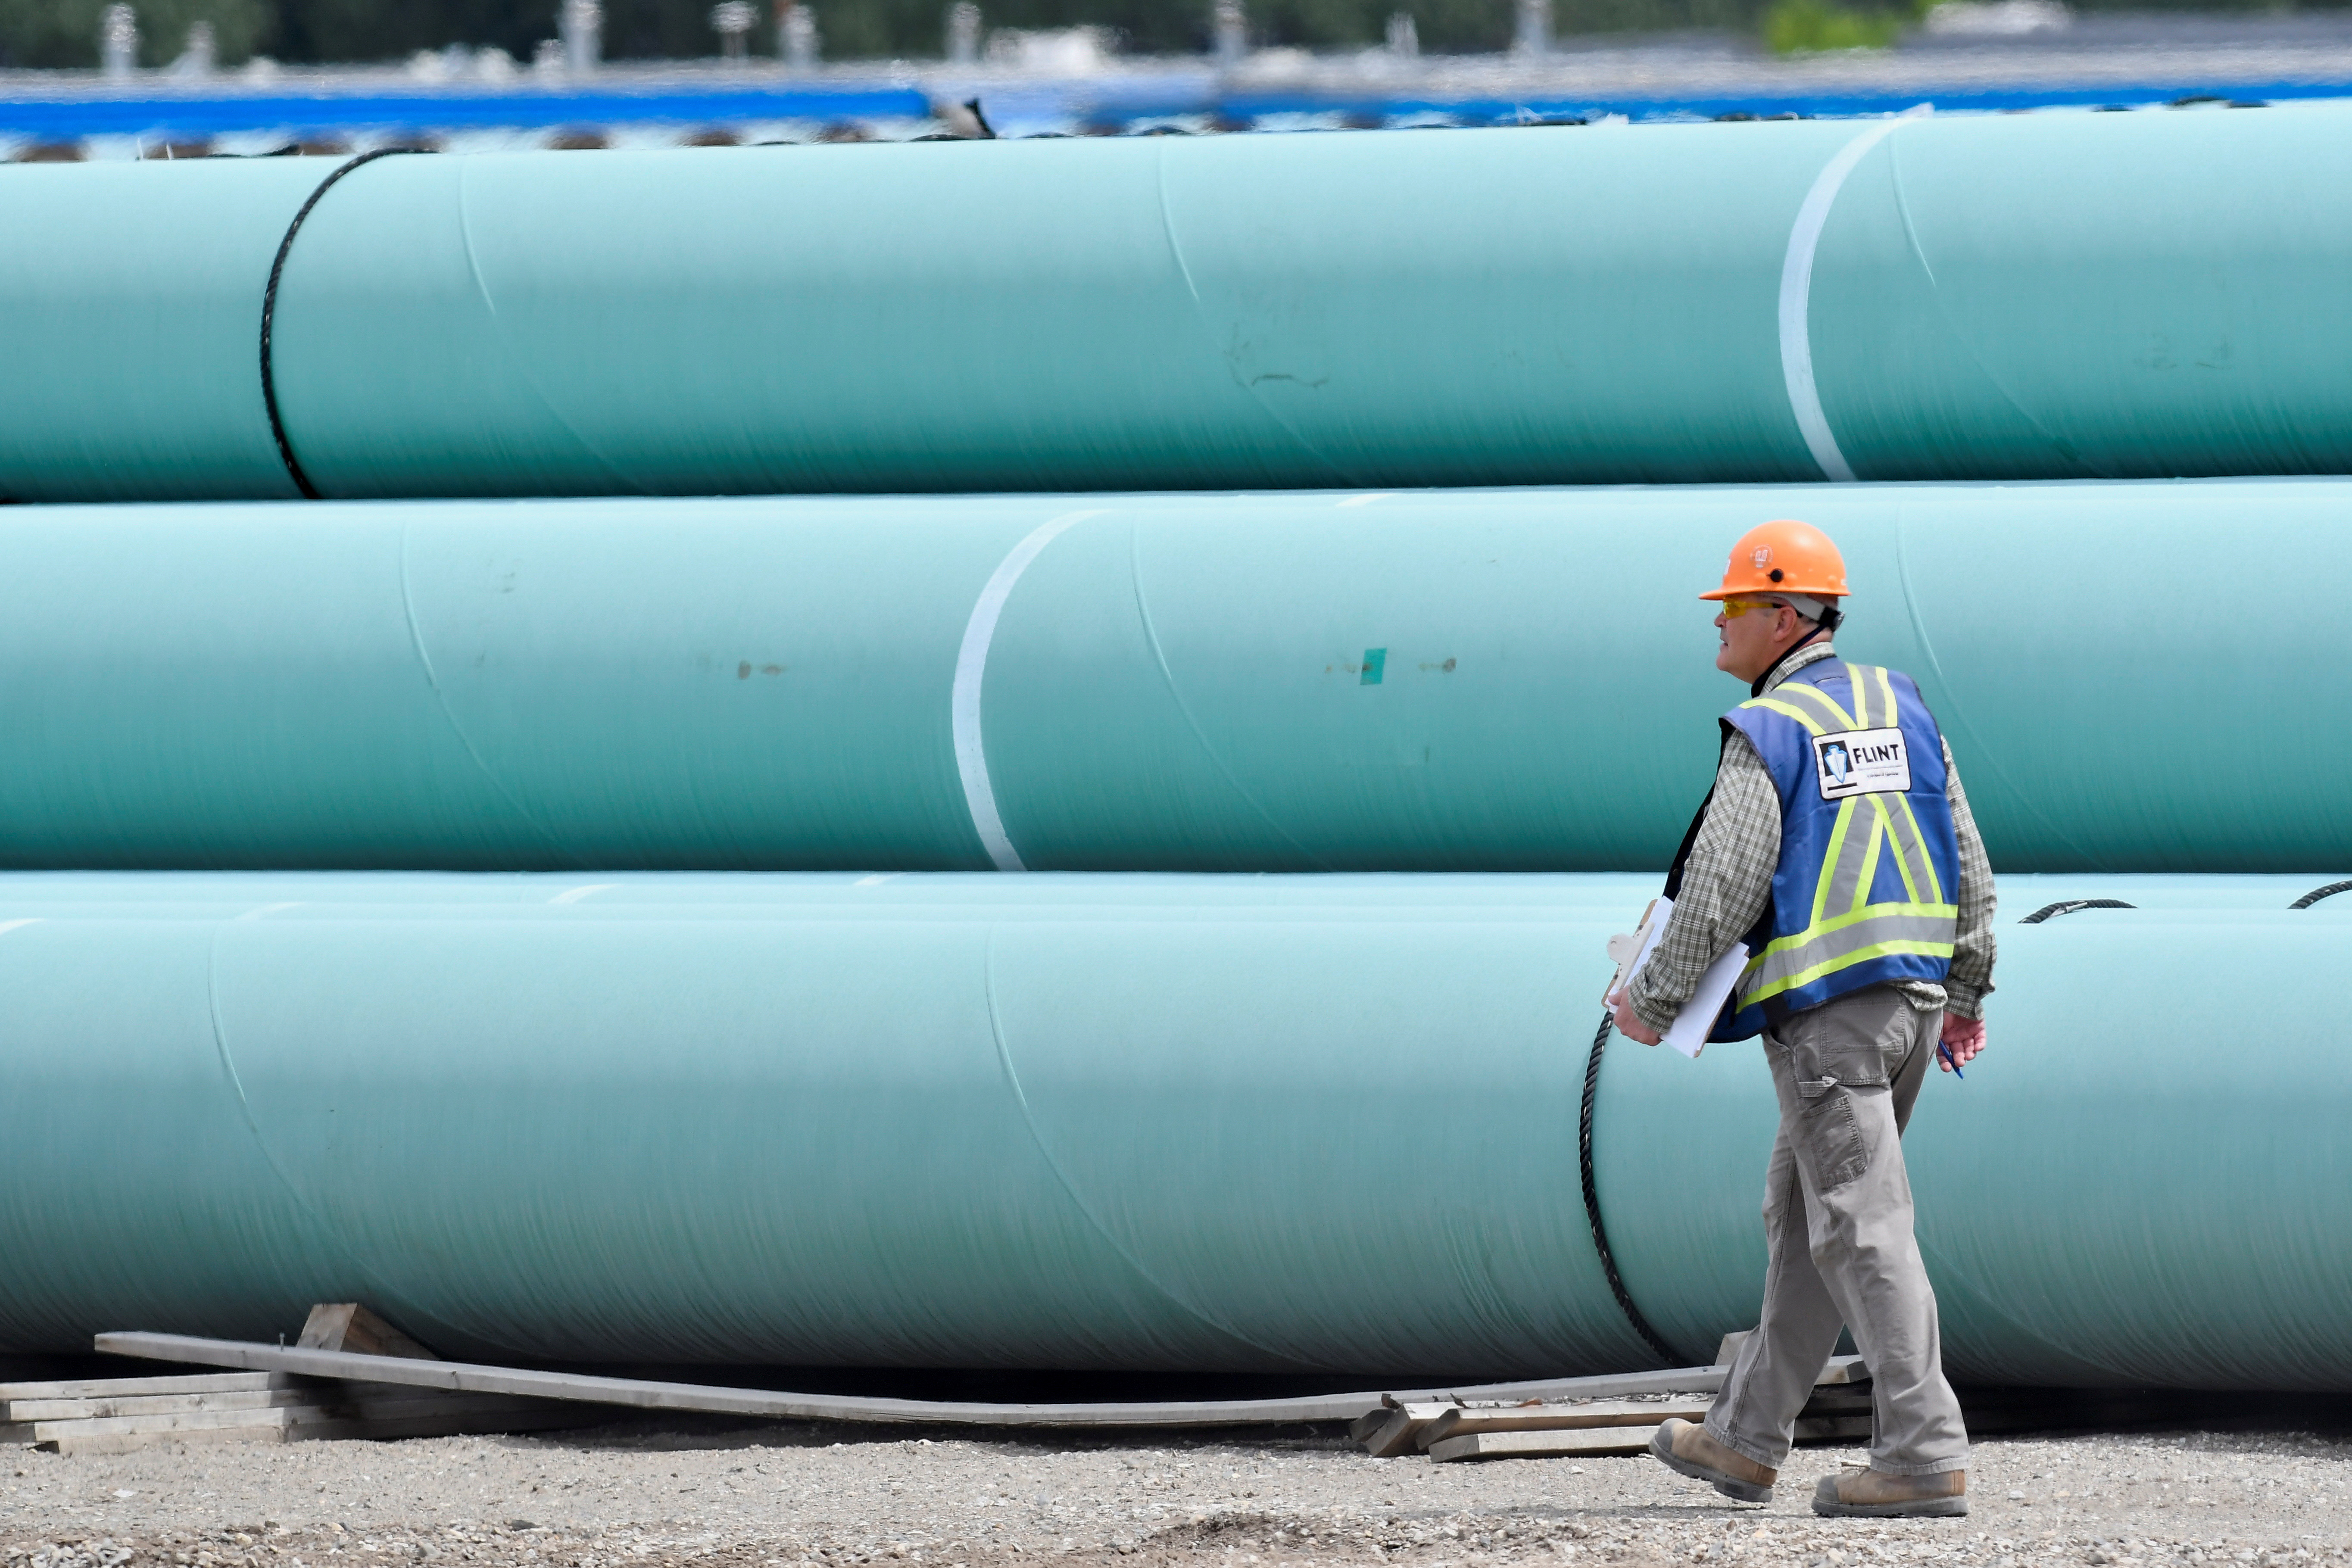 A pipe yard servicing government-owned oil pipeline operator Trans Mountain is seen in Kamloops